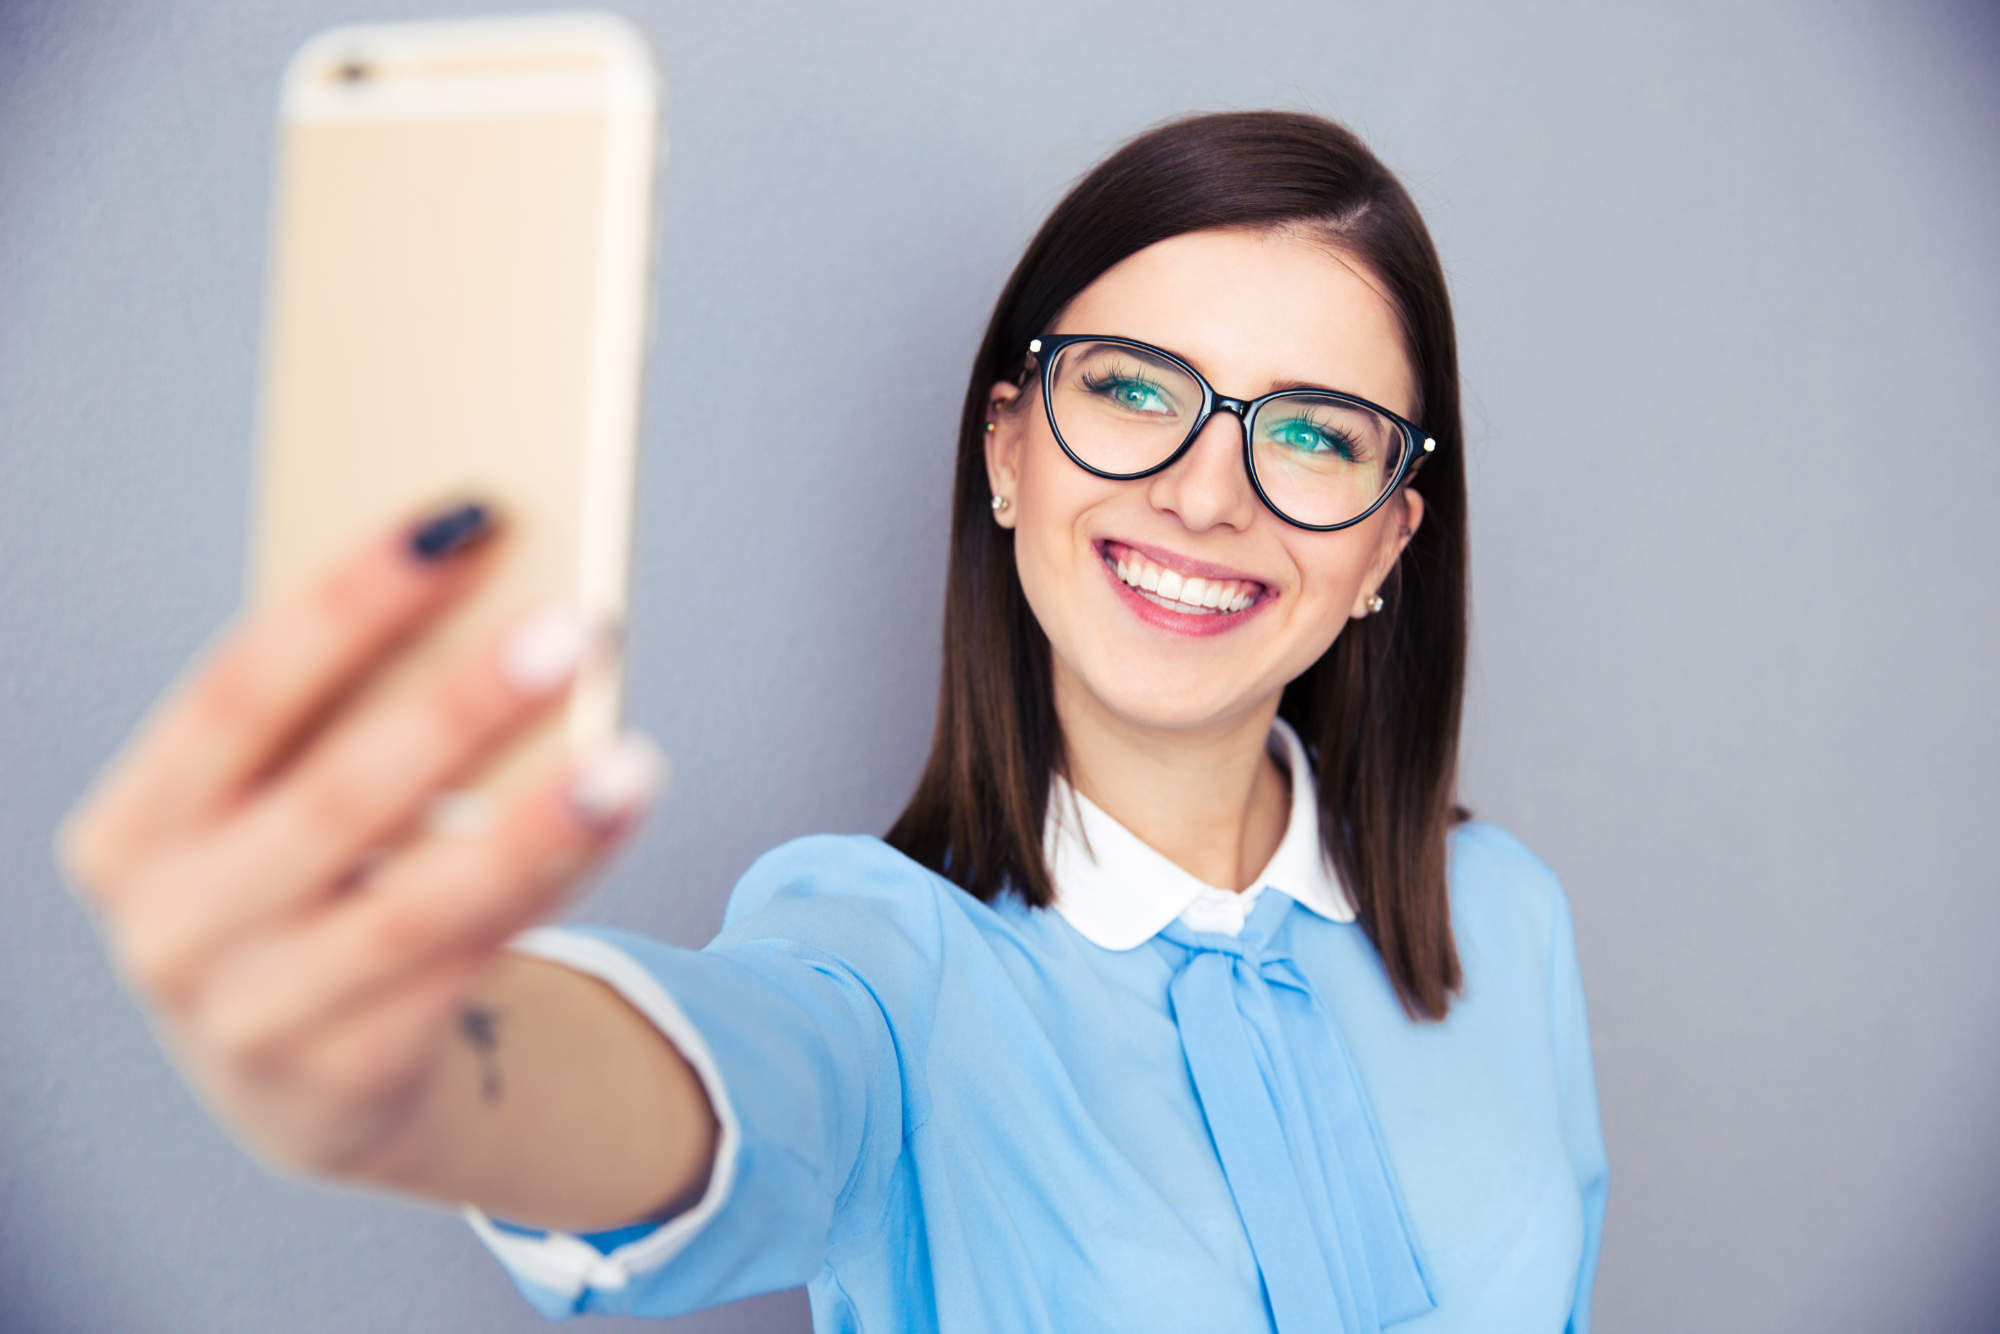 Good Photos for Online Dating – Why the Profile Picture in the Dating App Matters